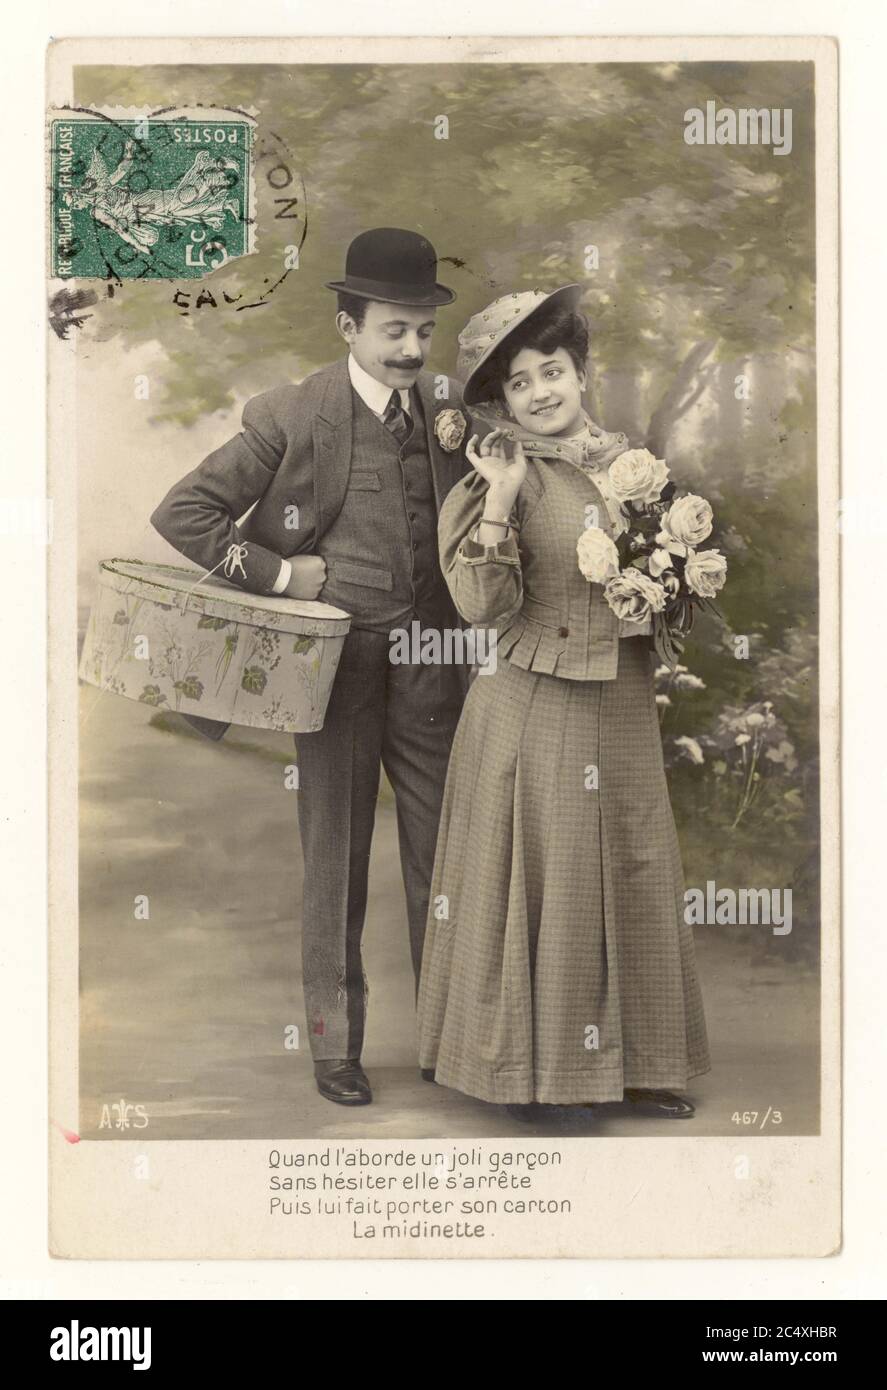 Original early 1900's French sentimental tinted greetings postcard - two young lovers, Man wearing a bowler hat, carries the woman's shopping, postally used green stamp on front of postcard France, circa 1911 Stock Photo